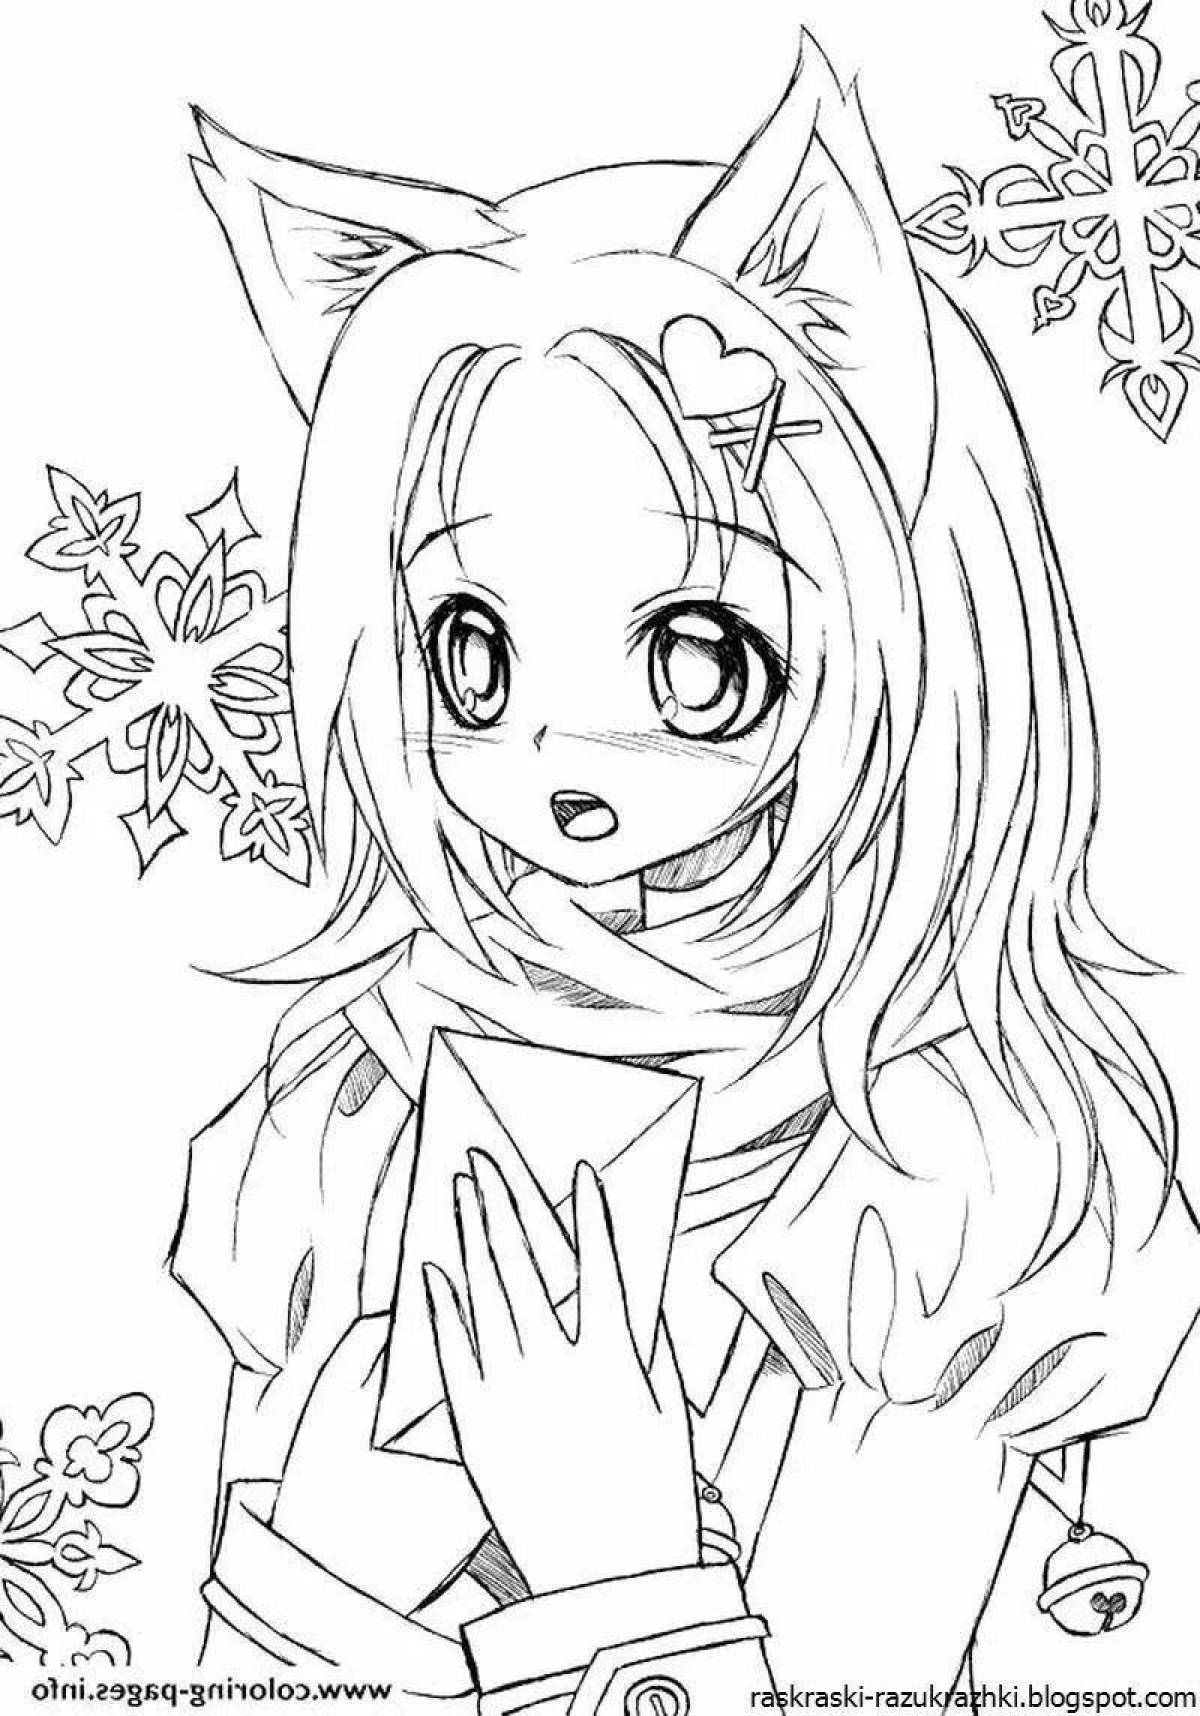 Amazing coloring pages for girls, beautiful and cute